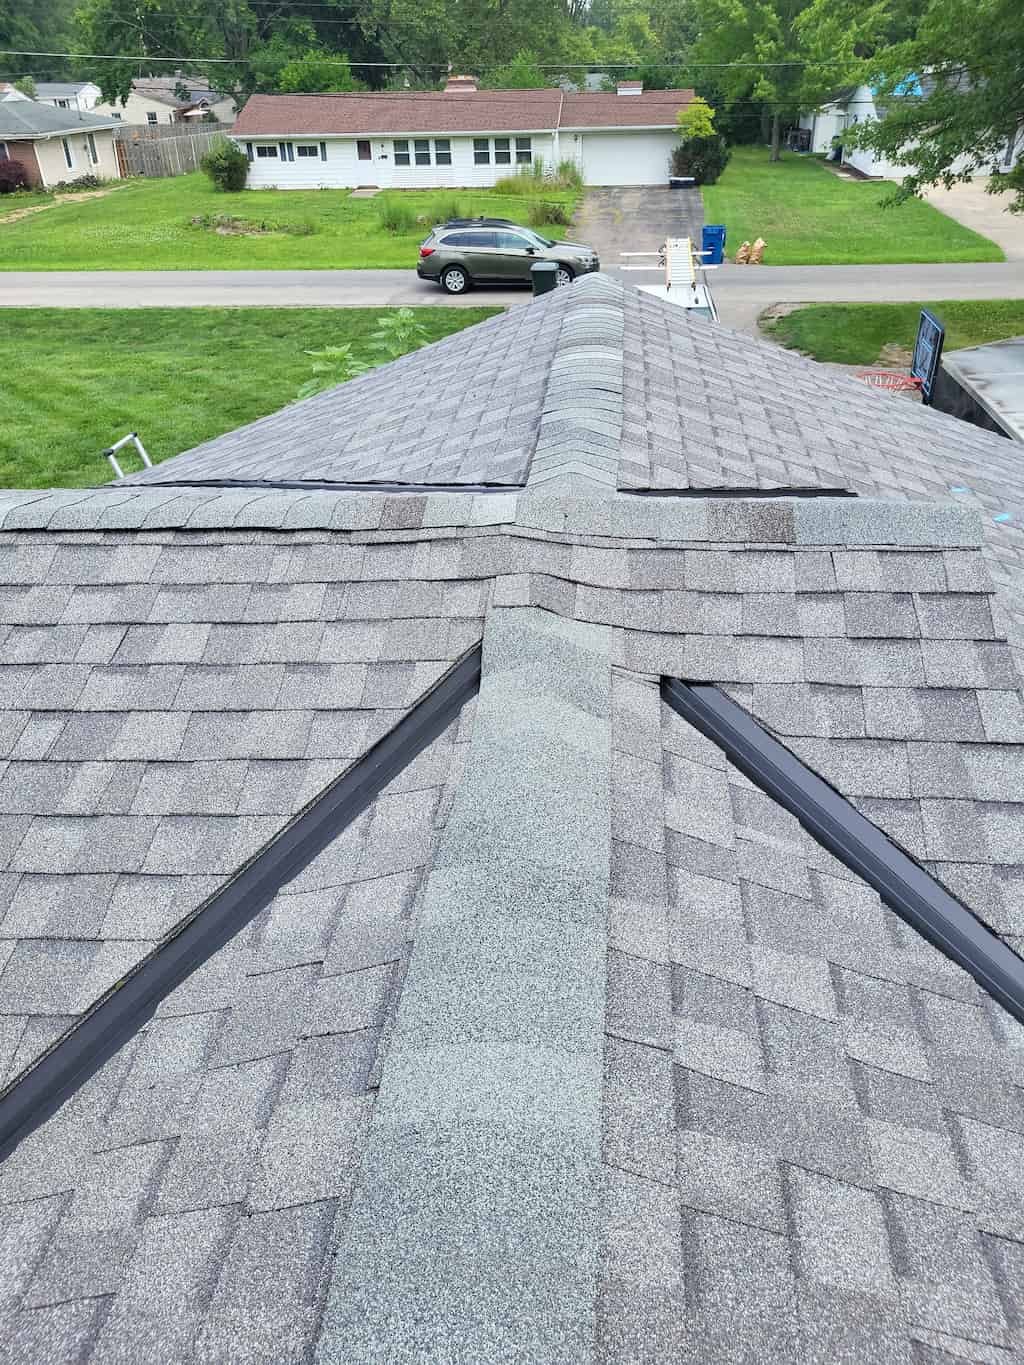 An aerial view of a shingled roof showcasing the meticulous workmanship and precision involved in its construction.